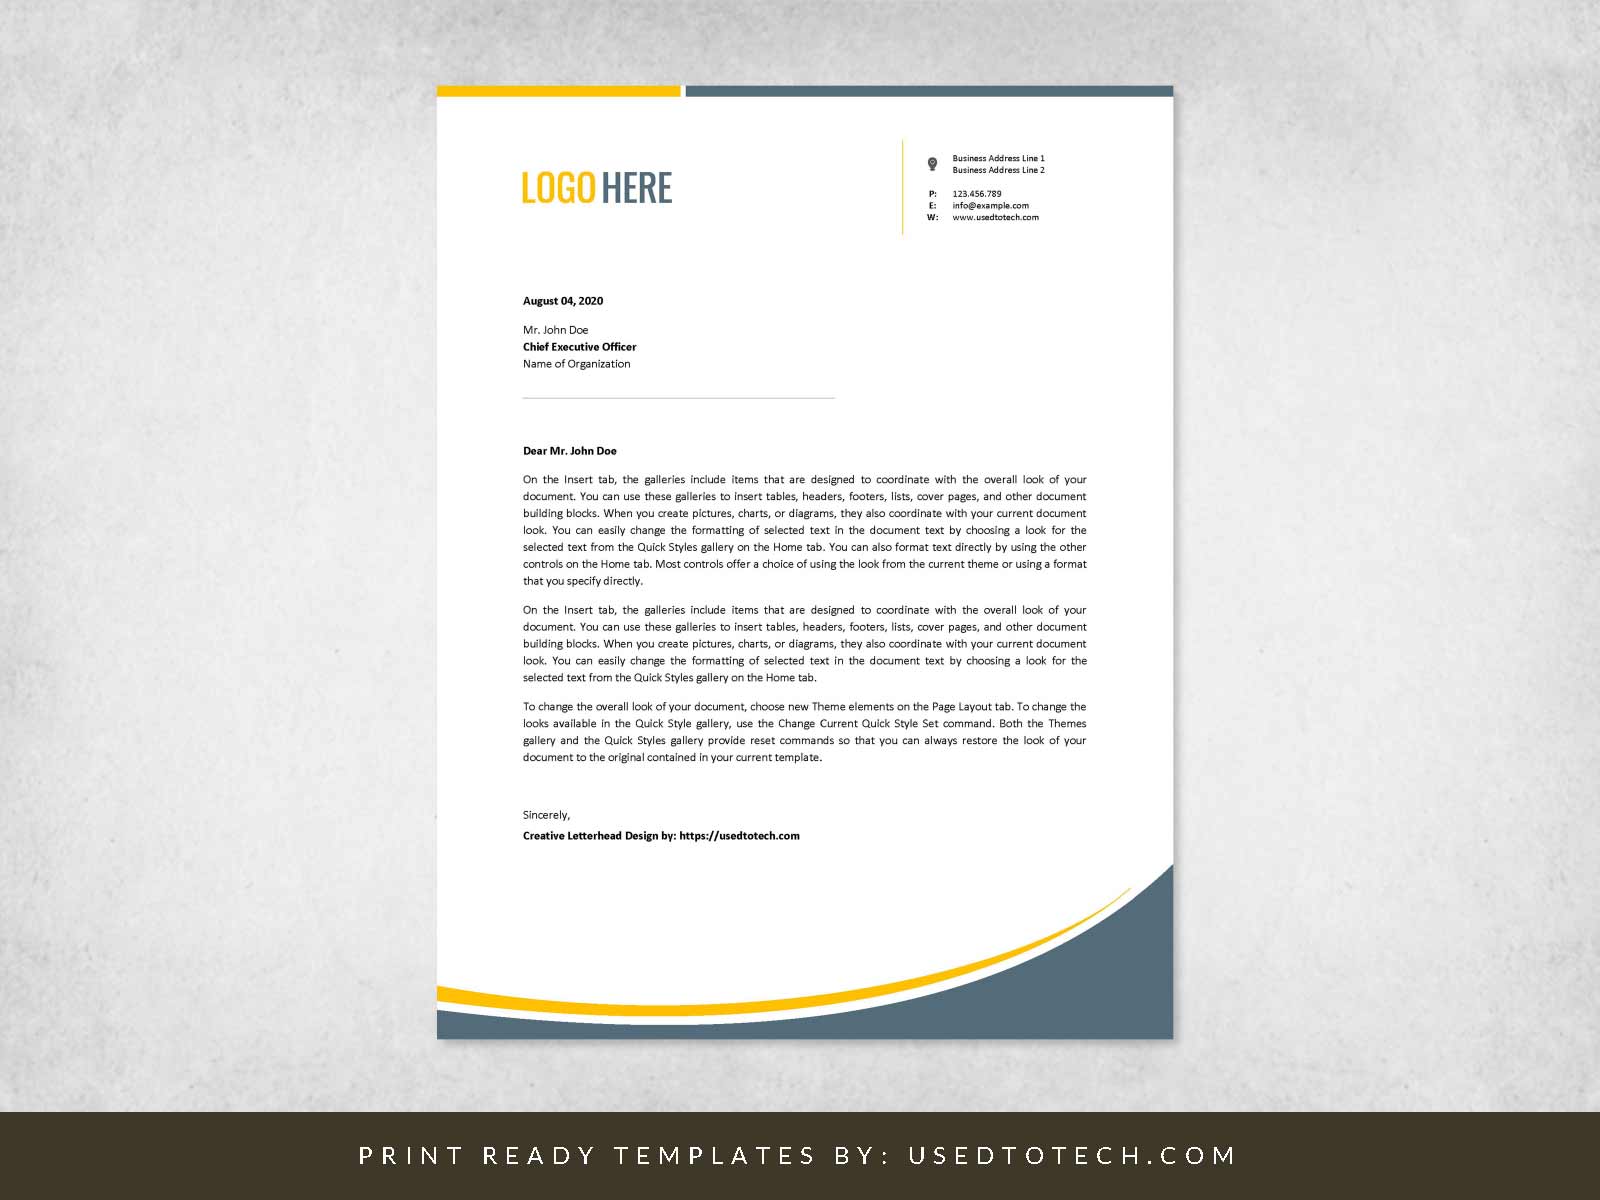 Word template for creative letterhead design - Used to Tech Intended For Header Templates For Word